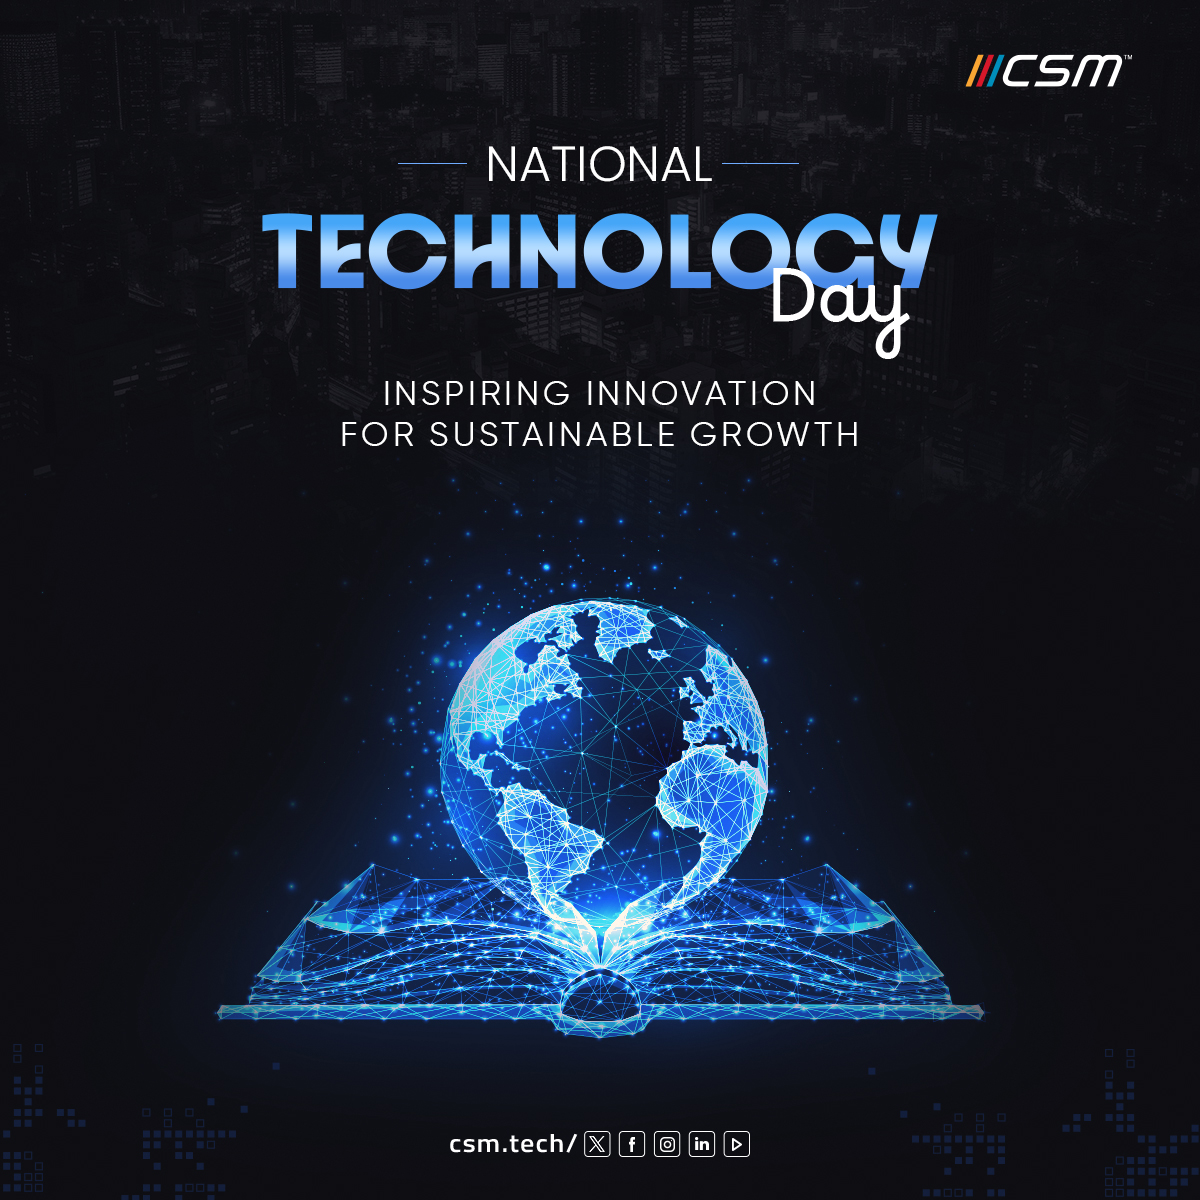 Honoring youthful visionaries shaping the digital era on National Technology Day. #CSMTech #NationalTechnologyDay #Technology #YouthInTech